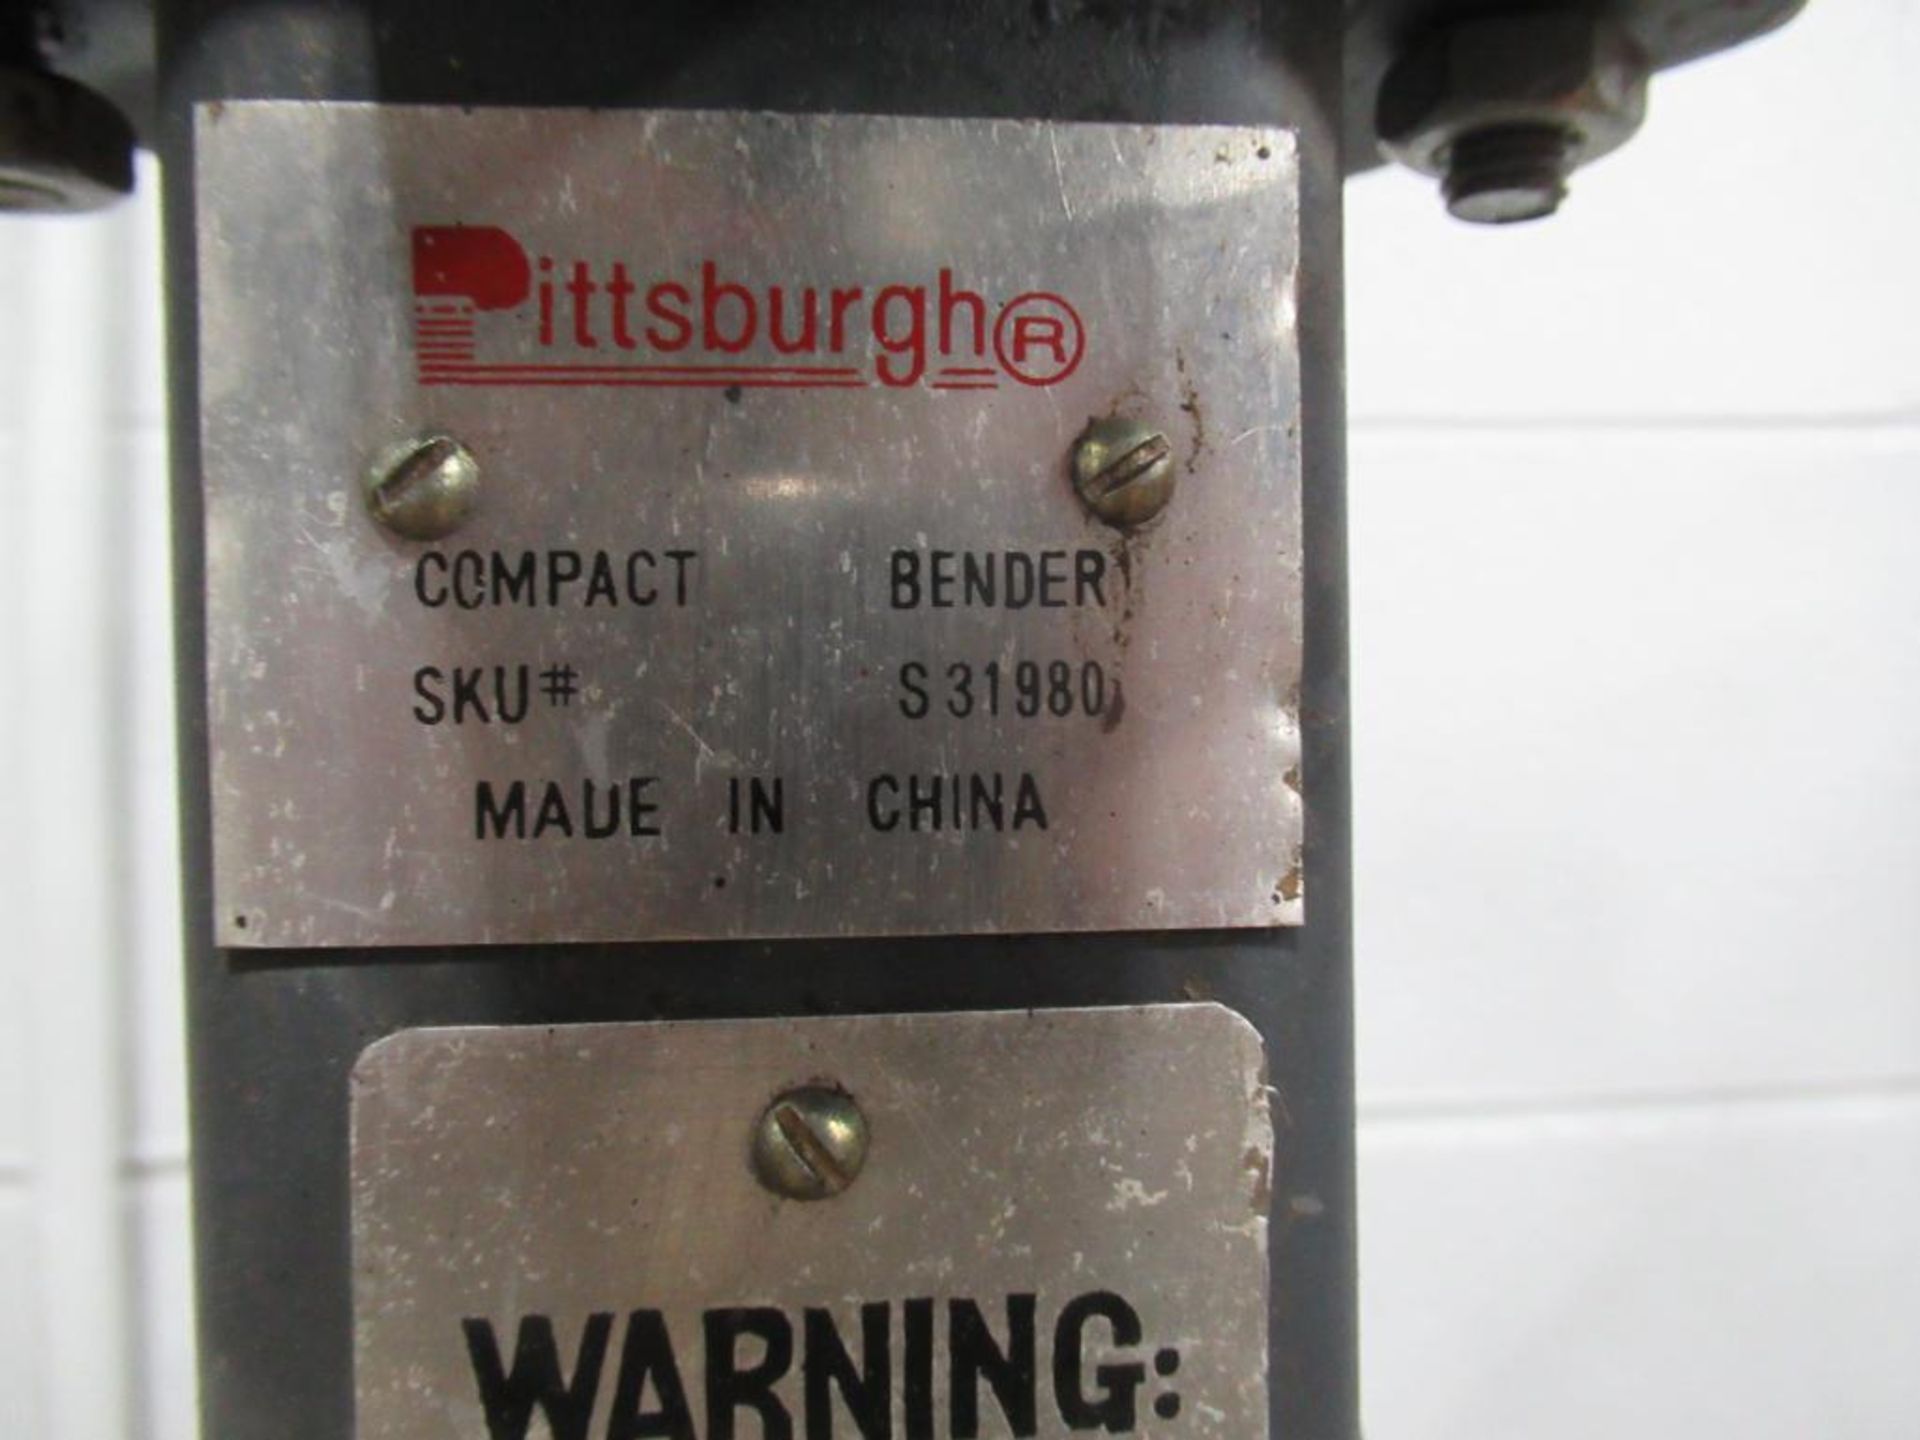 Pittsburgh S31980 Compact Bender - Image 2 of 2